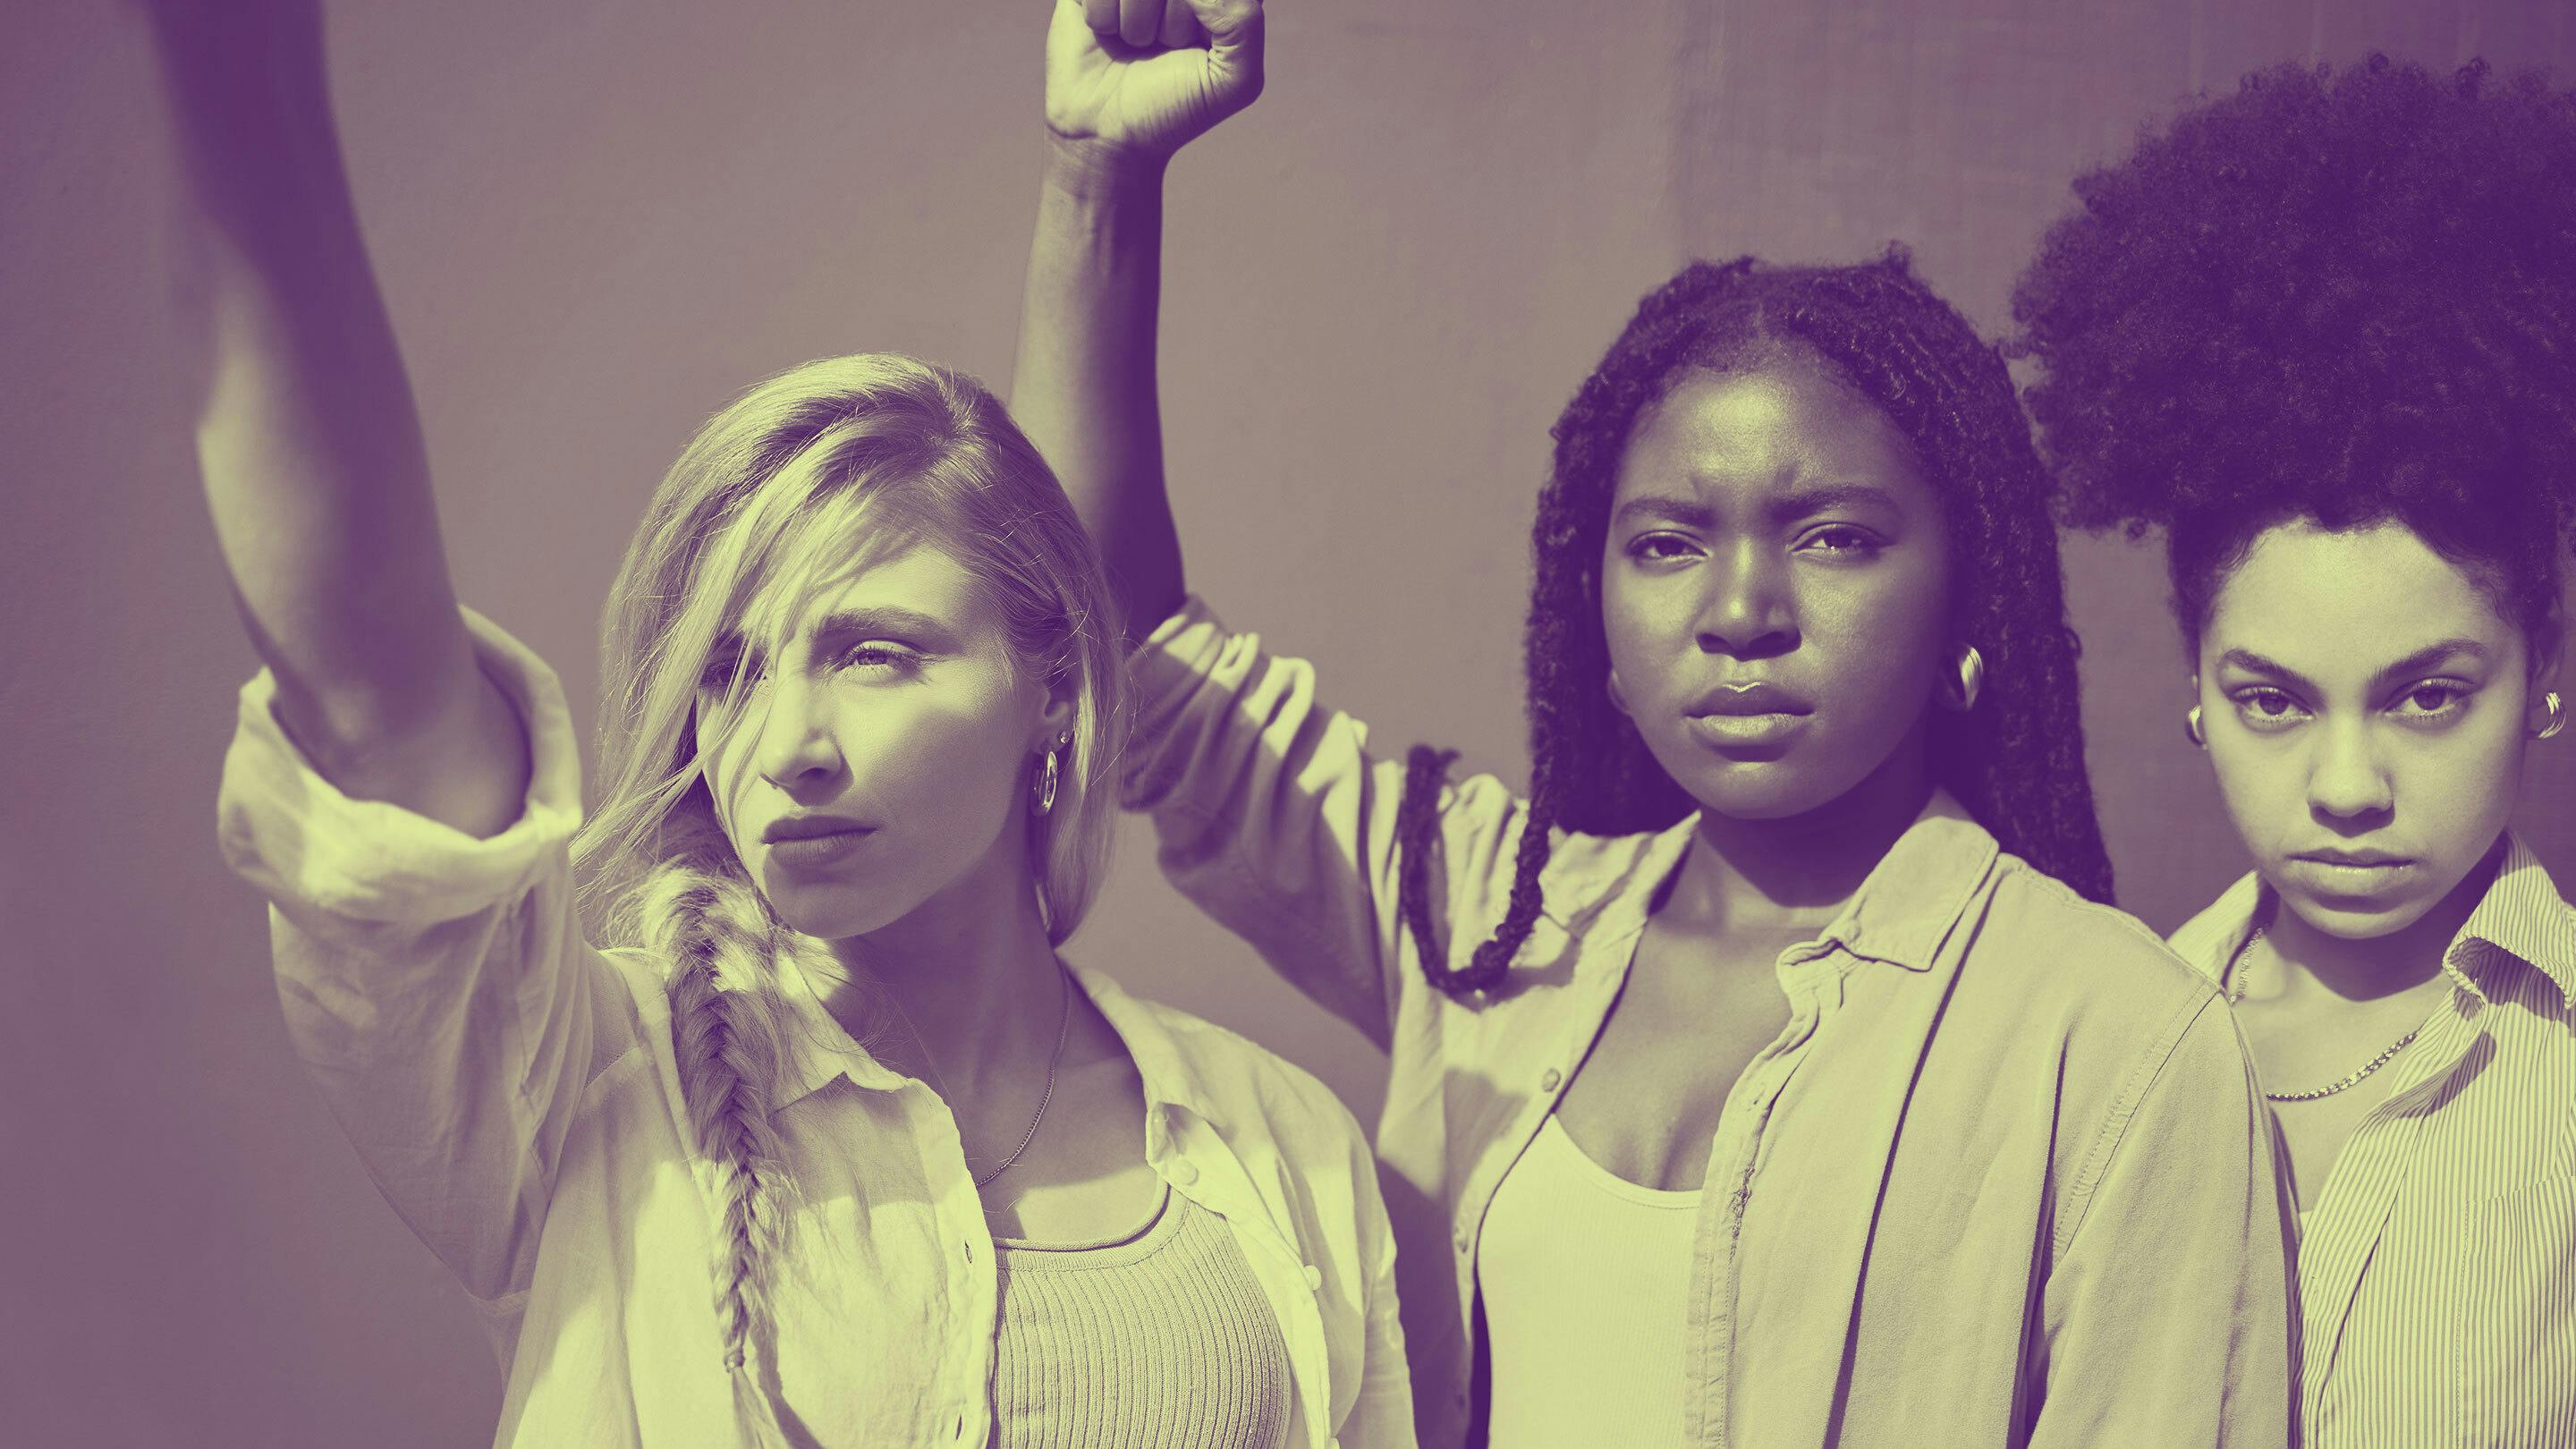 Portrait of three diverse young women with looks of defiance and fists raised